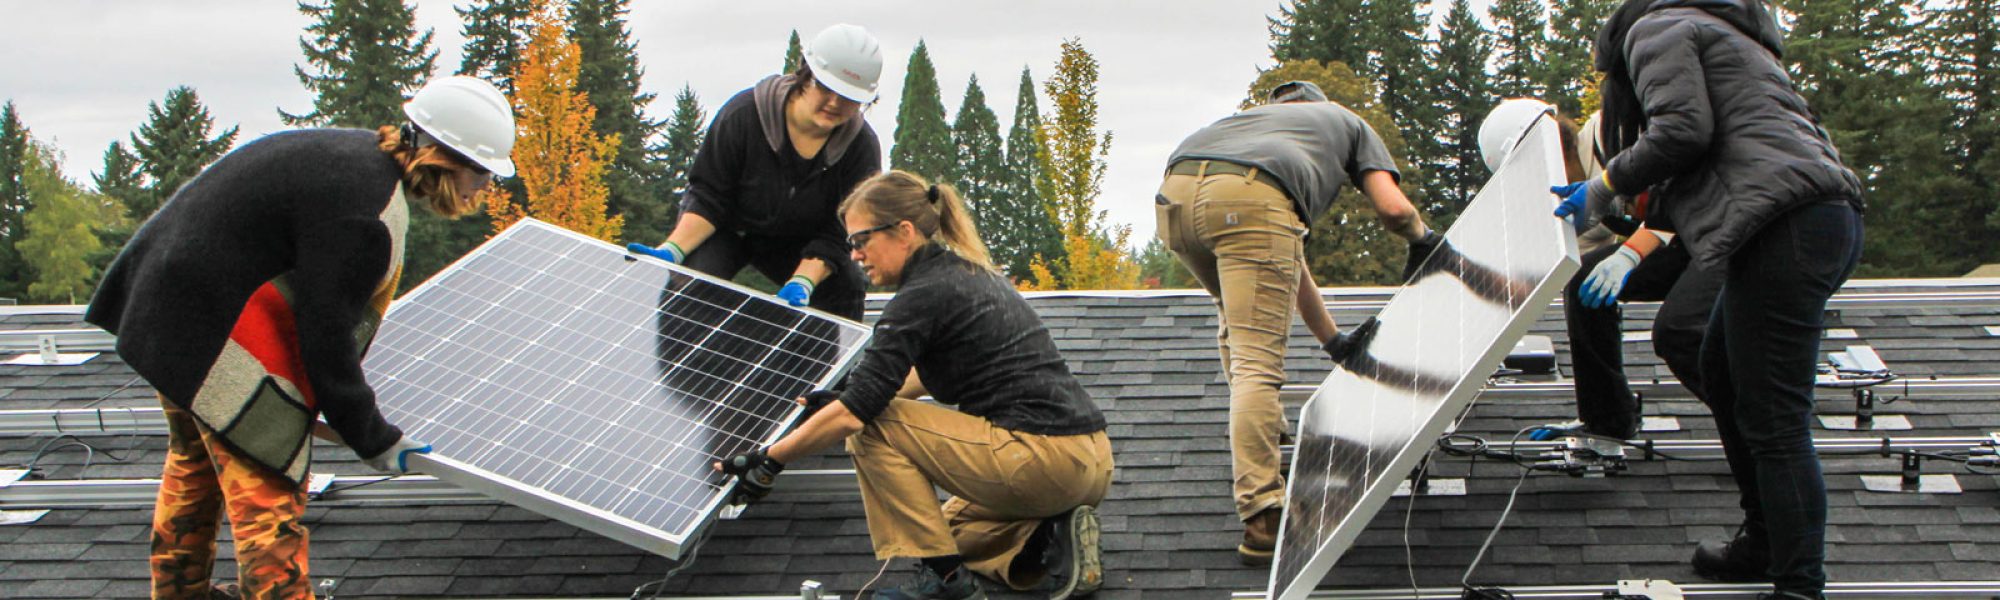 Solar power’s continued success rests on diversifying its workforce